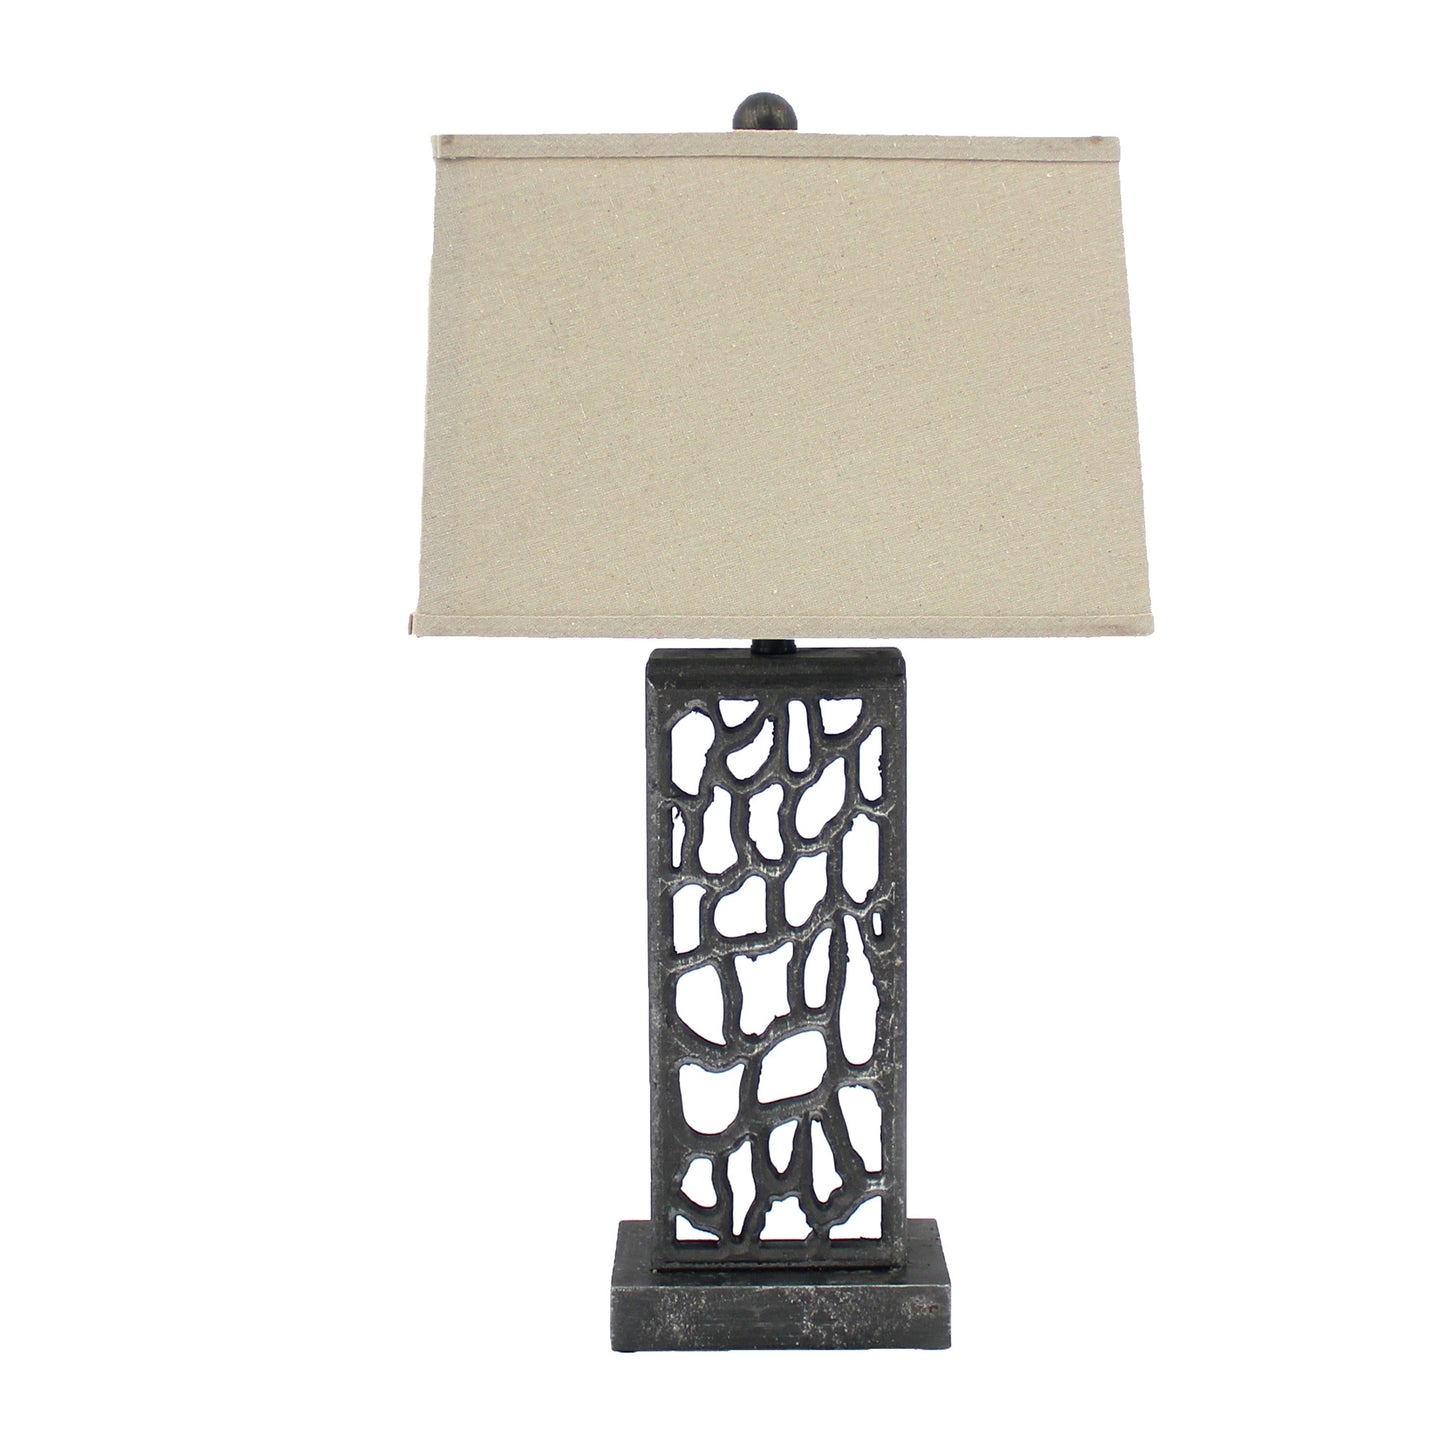 5 X 8 X 28.75 Silver Metal With Multi Mini Grotto Pattern - Table Lamp